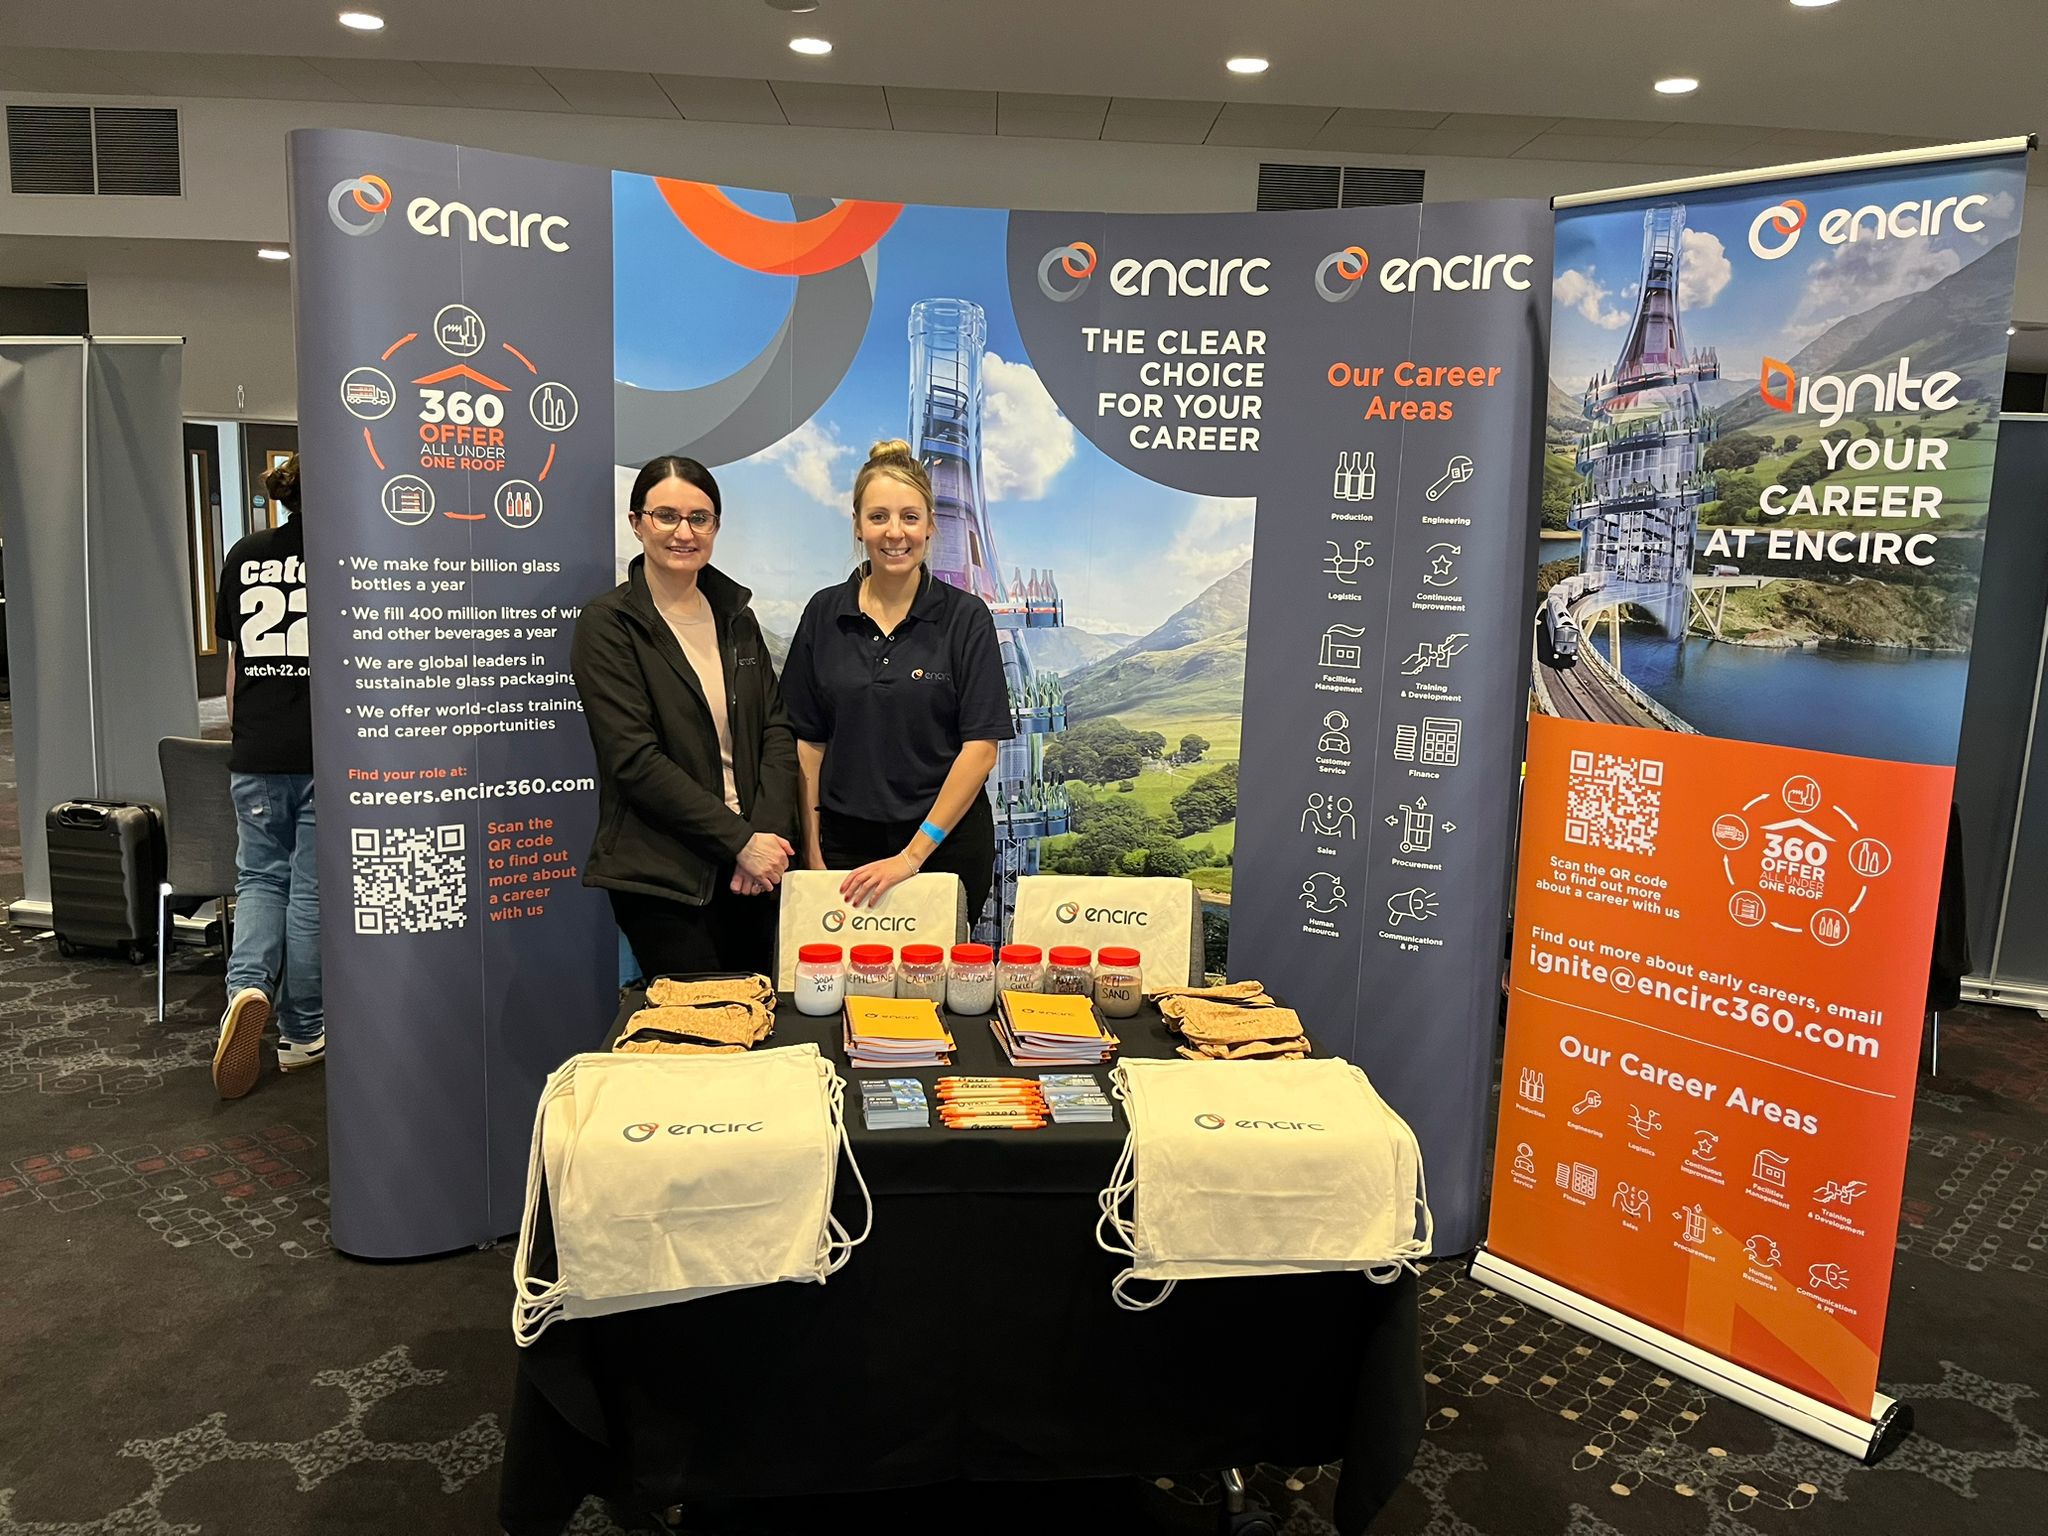 Encirc at our event in Bristol